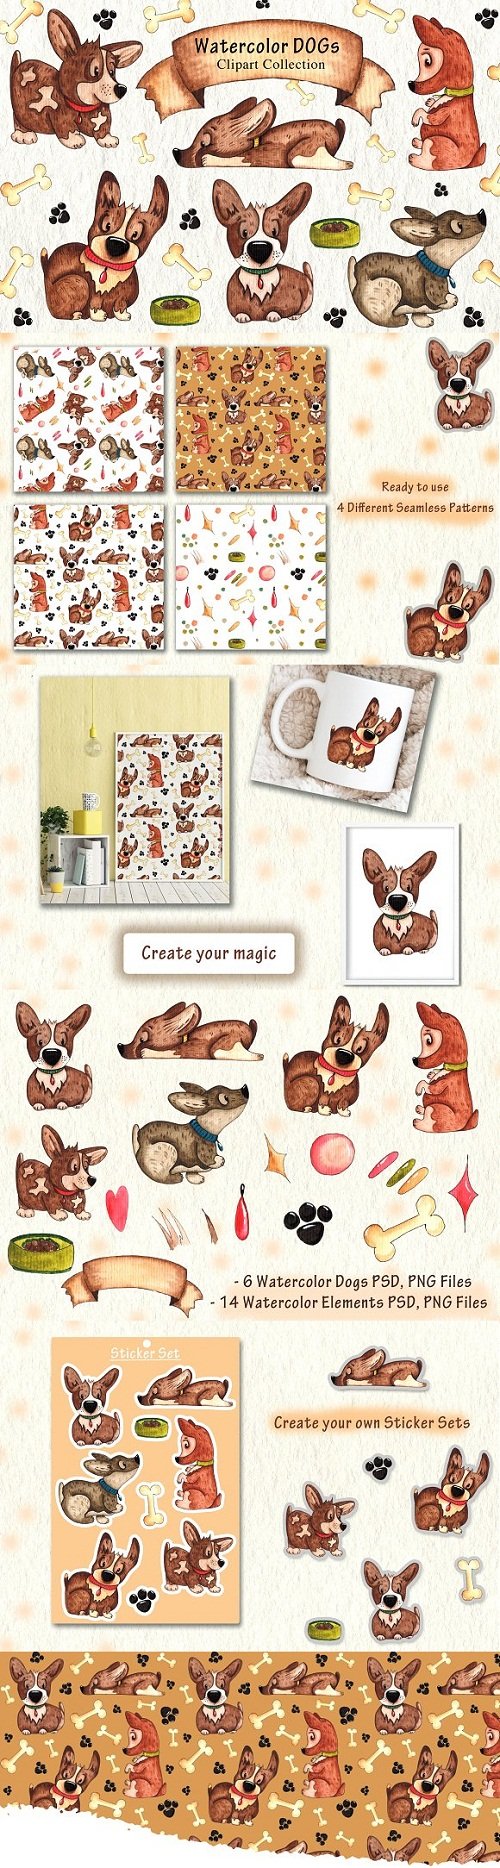 CreativeMarket - Watercolor DOGs Collection - 3487421